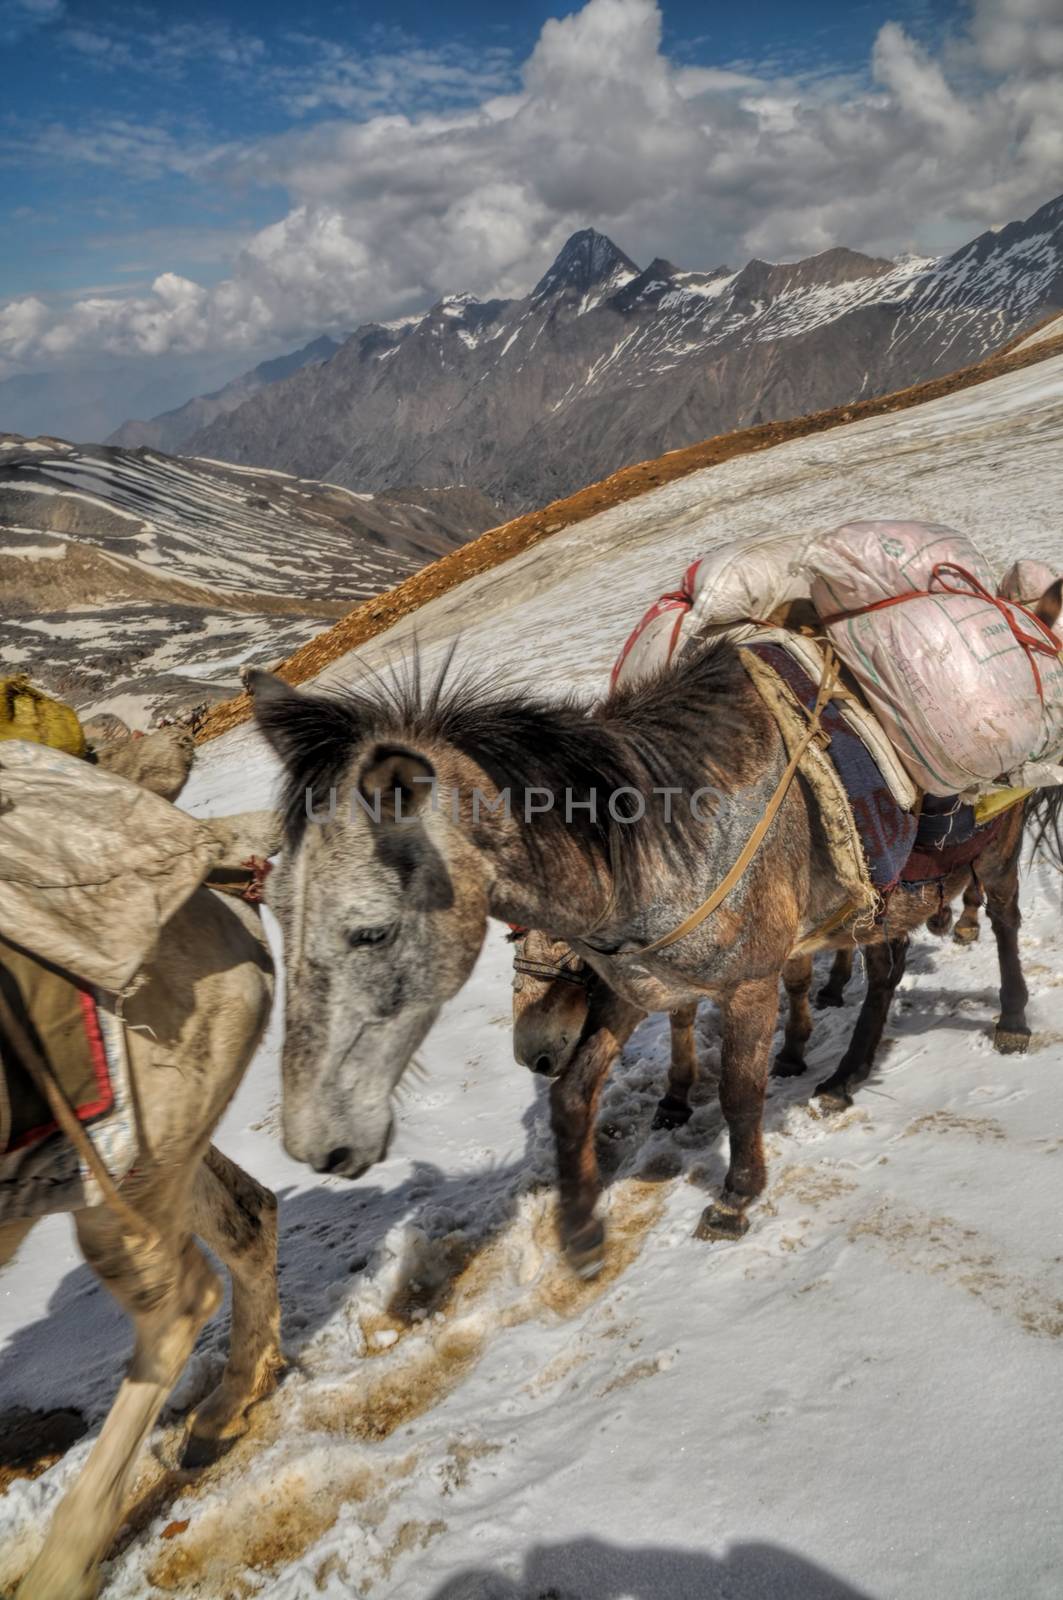 Caravan of mules in high altitudes of Himalayas mountains in Nepal